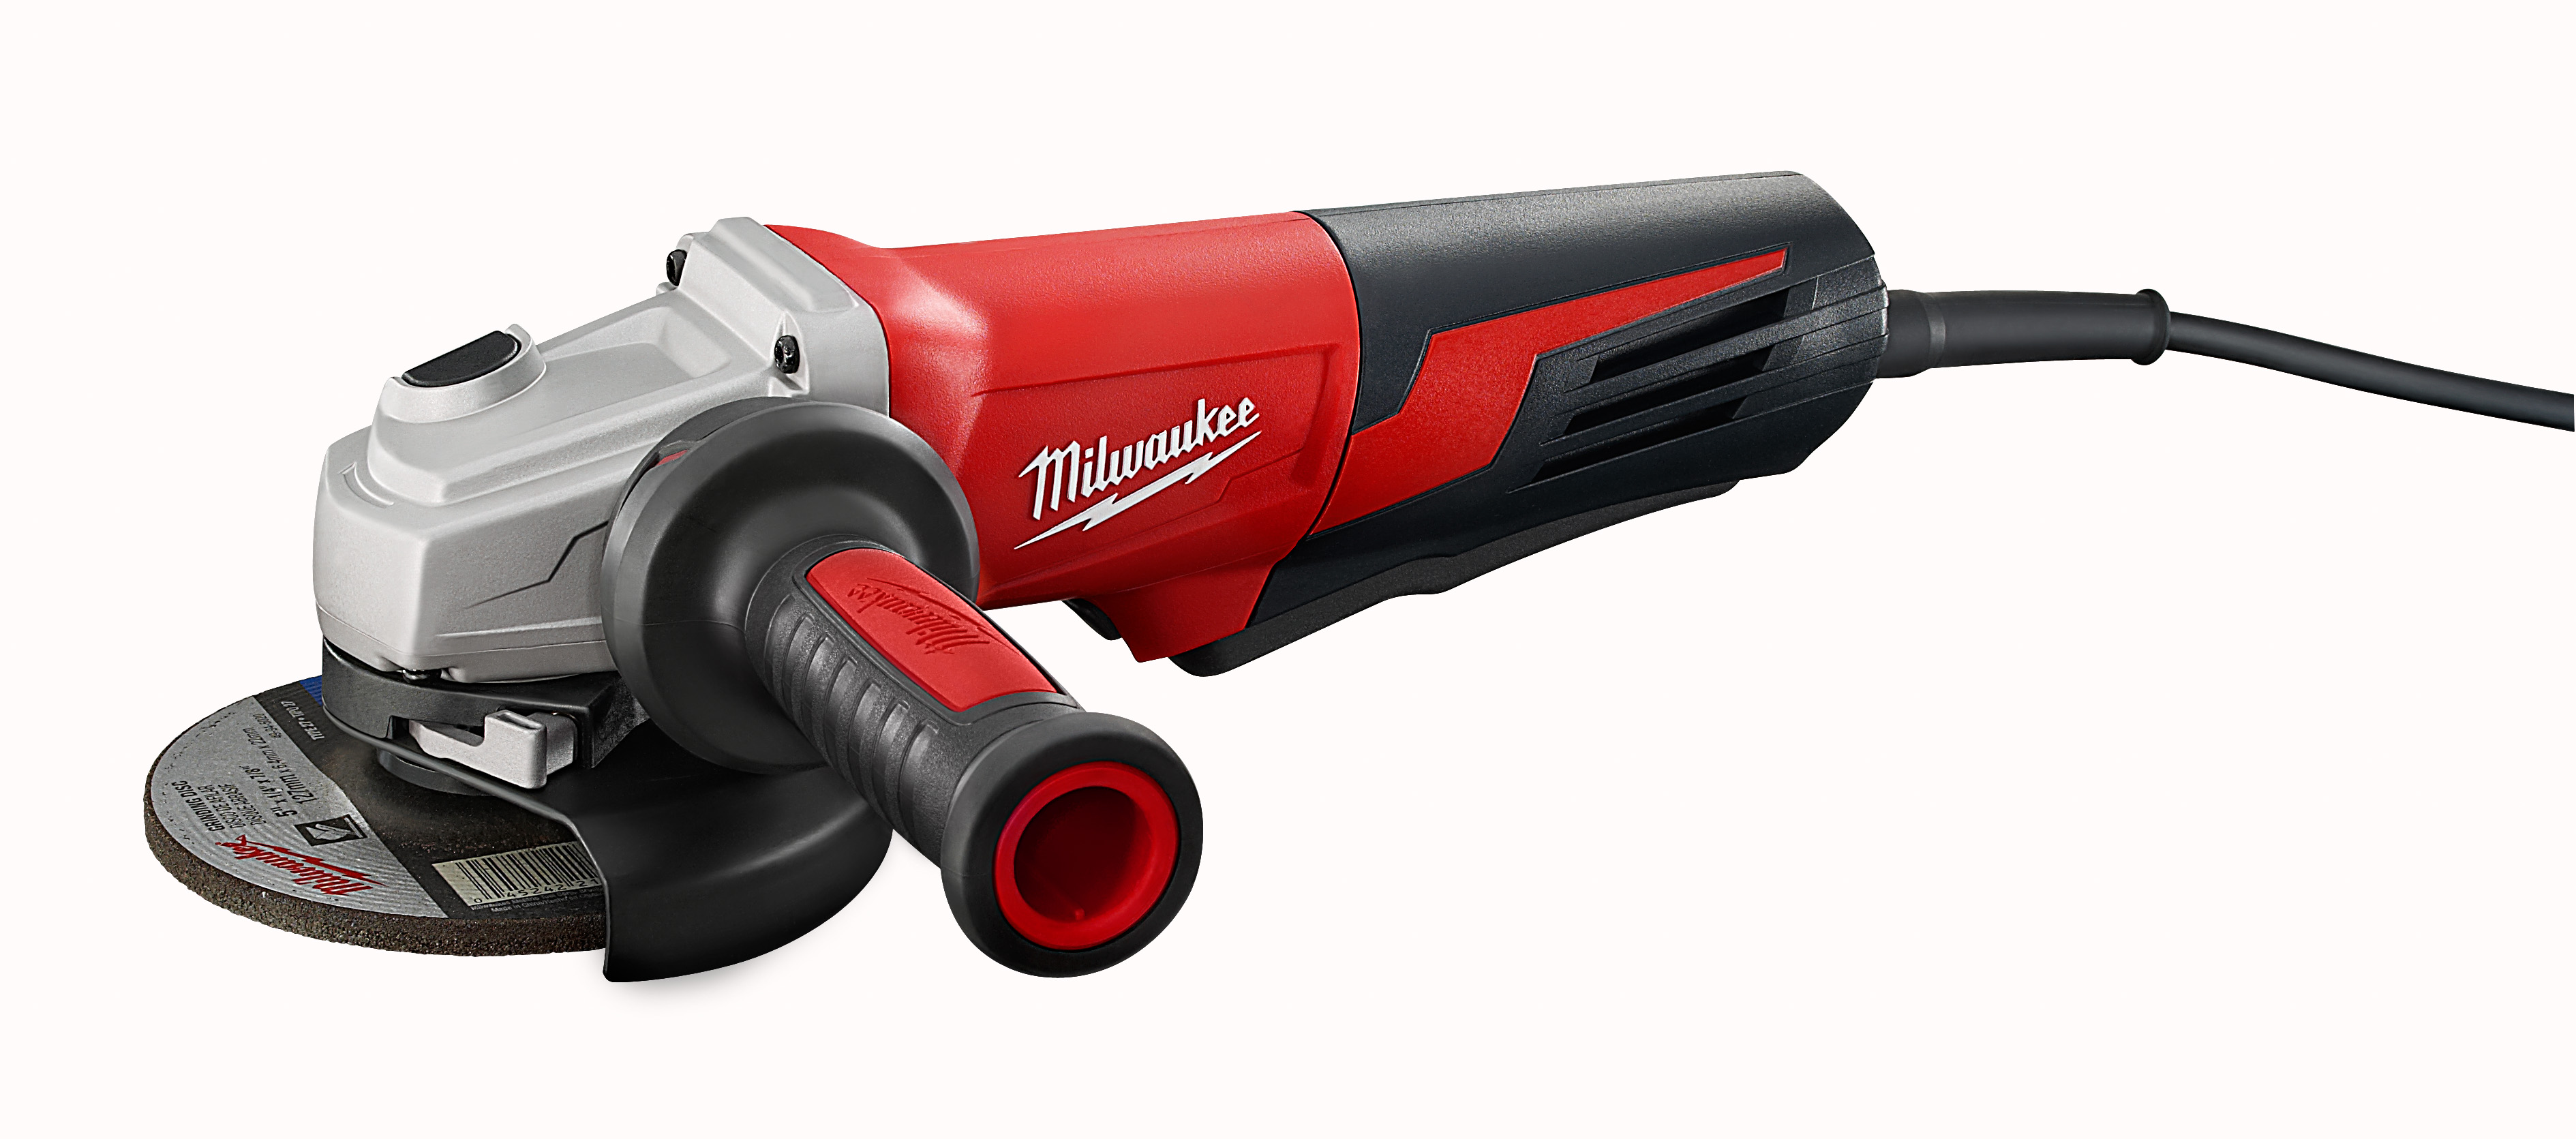 Milwaukee® 6117-31 Double Insulated Small Angle Grinder, 5 in Dia Wheel, 5/8-11 Arbor/Shank, 120 VAC, Black/Red